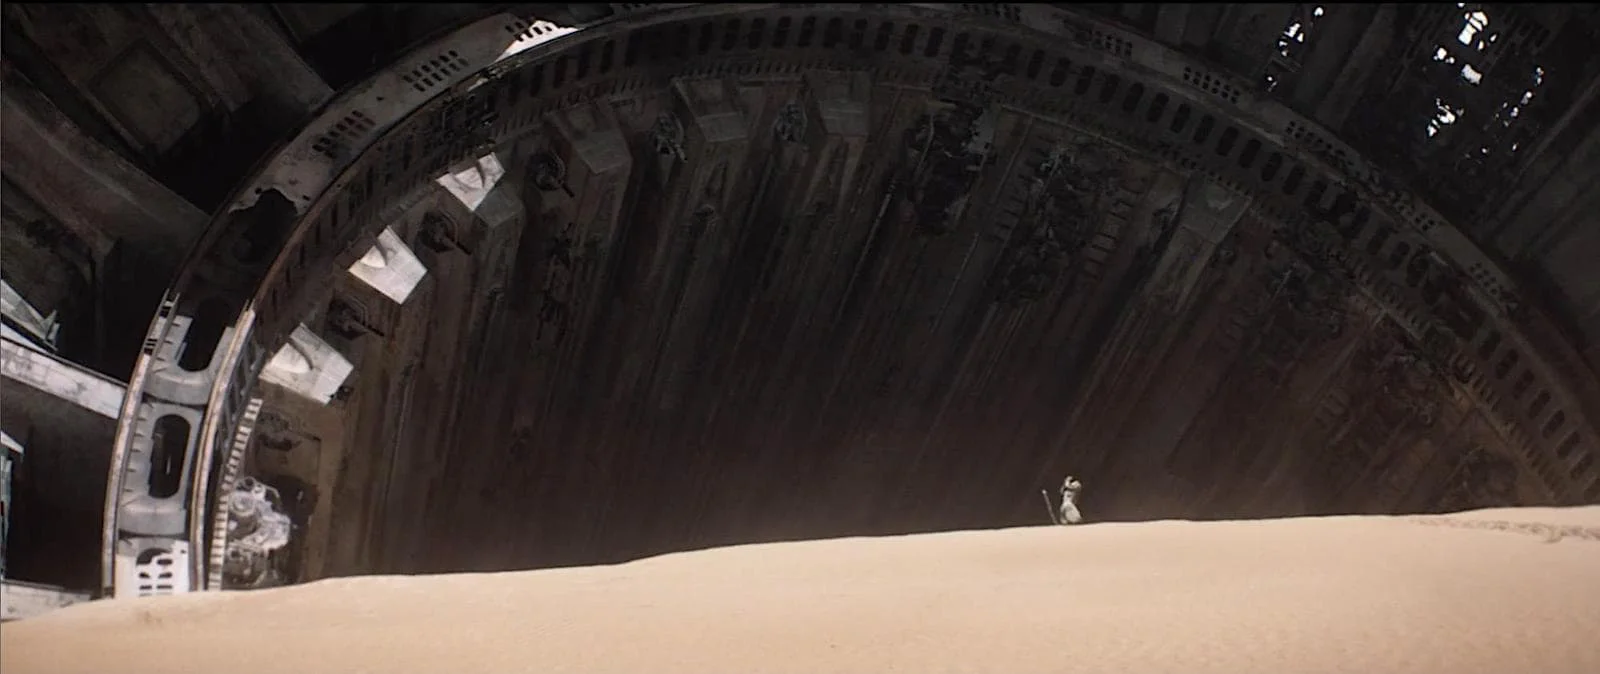 Extreme Wide Angle Shot - Camera Movements and Camera Angles - The Force Awakens